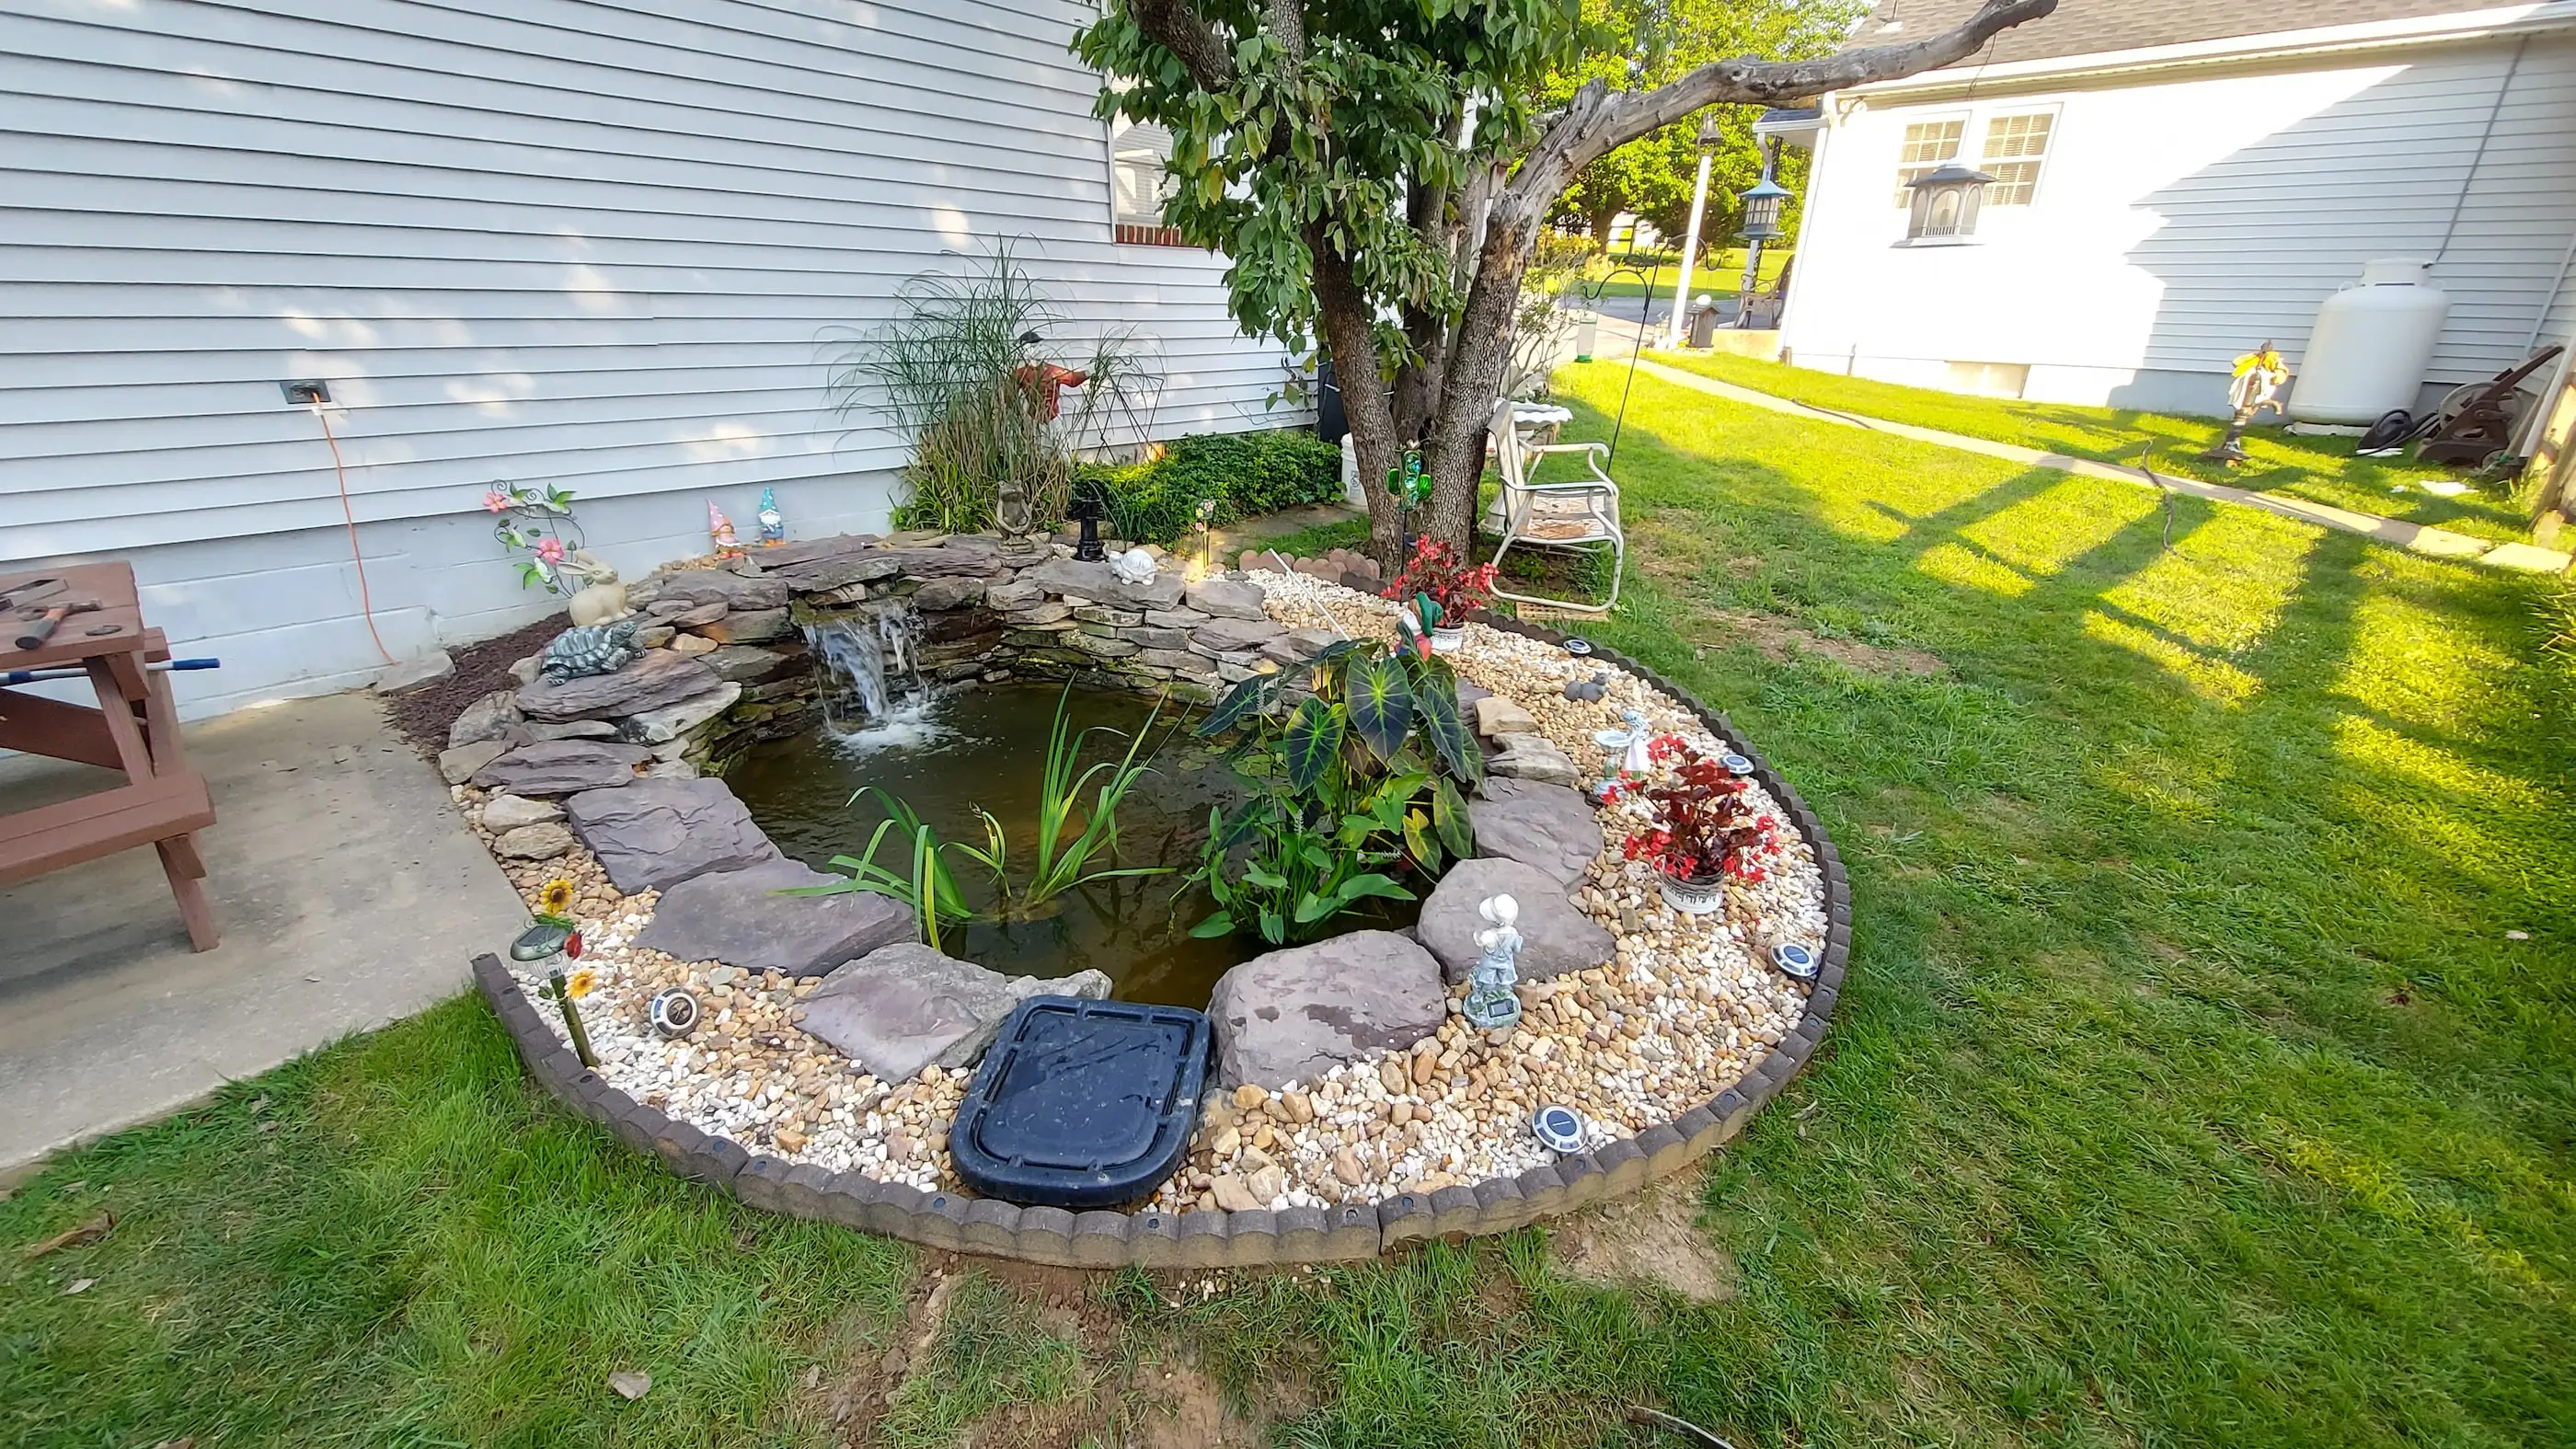 A koi pond built in Owings Mills, MD stocked with water lilies, elephant ears and irises. These plants help
						process nutrients inside a pond such as fish food and fish waste. Pond plants are vital components to
						ecoystem ponds as they naturally filter water and provide shade.
																																